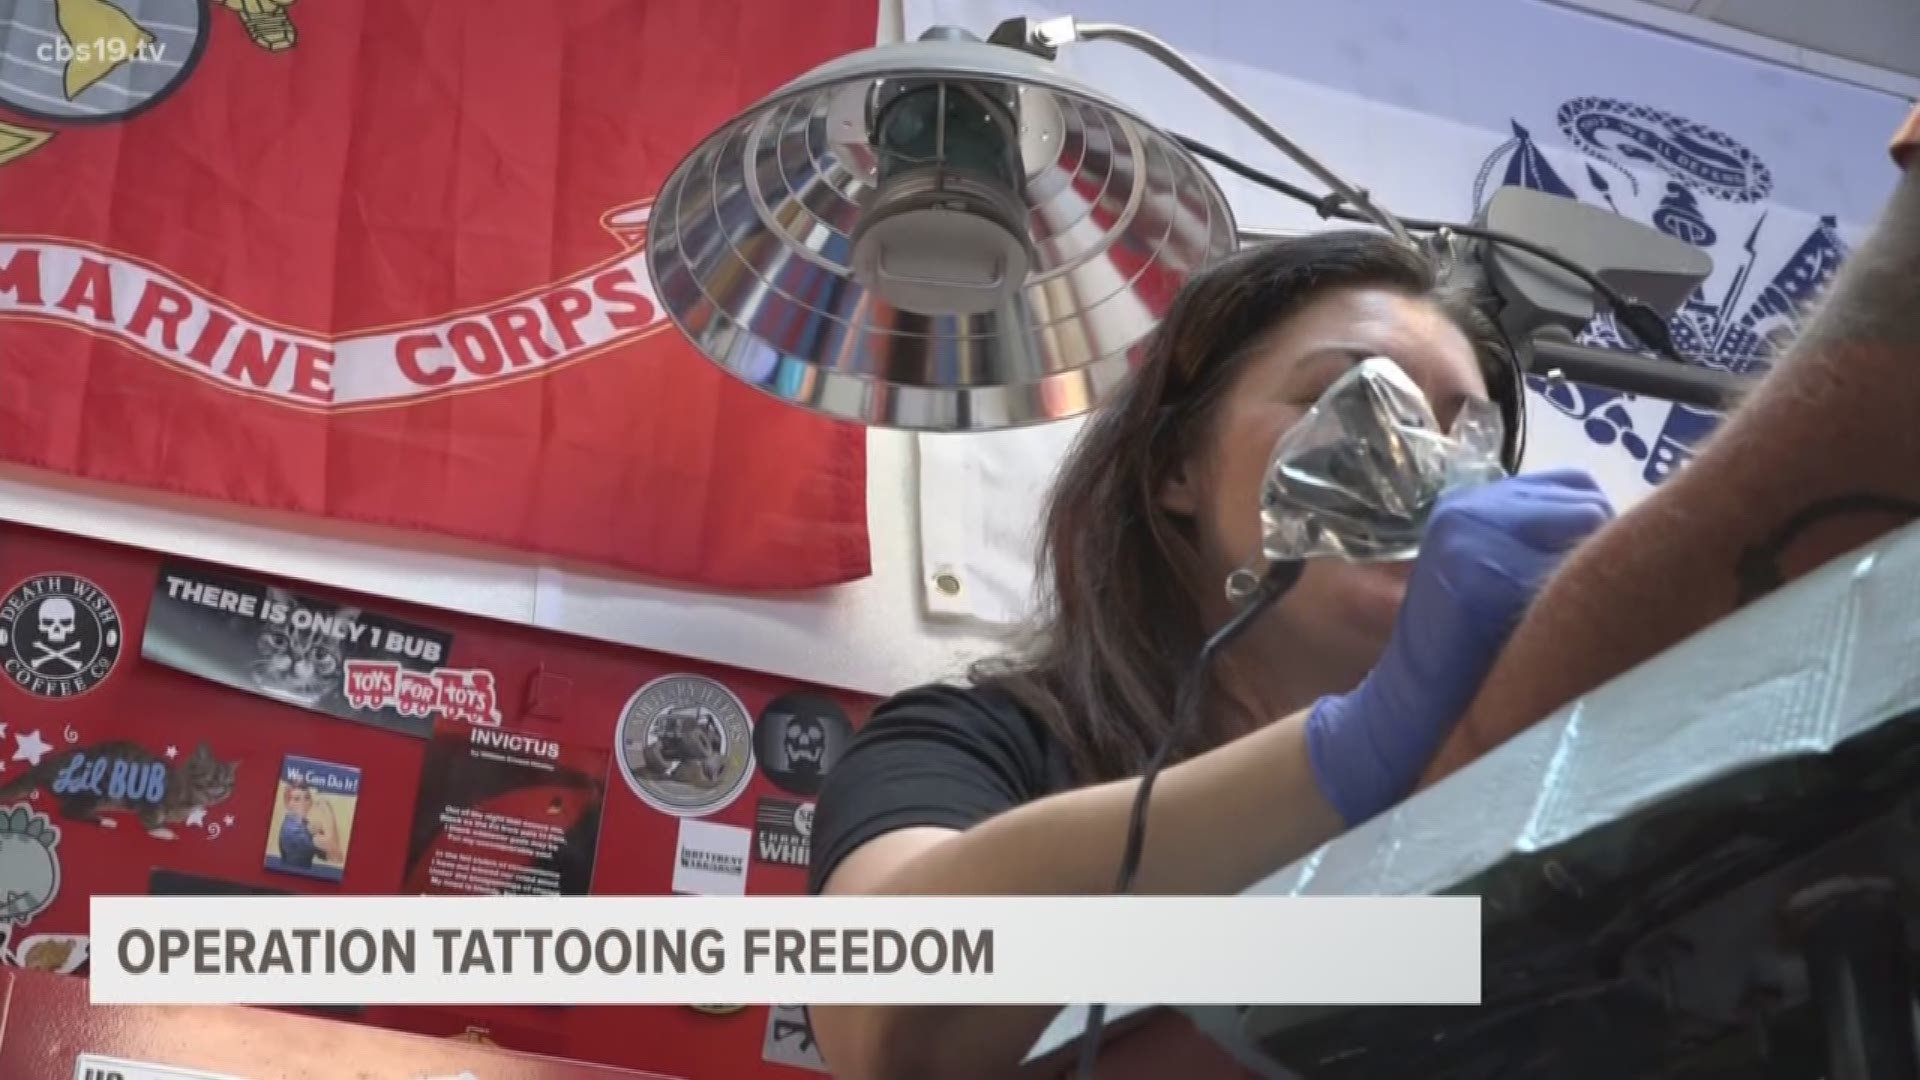 Ink Armory Art & Tattoo in Longview and Operation Tattooing Freedom brings a source of relief and hope to veterans dealing with Post-Traumatic Stress Disorder. CBS19's Lexie Hudson shows us how.